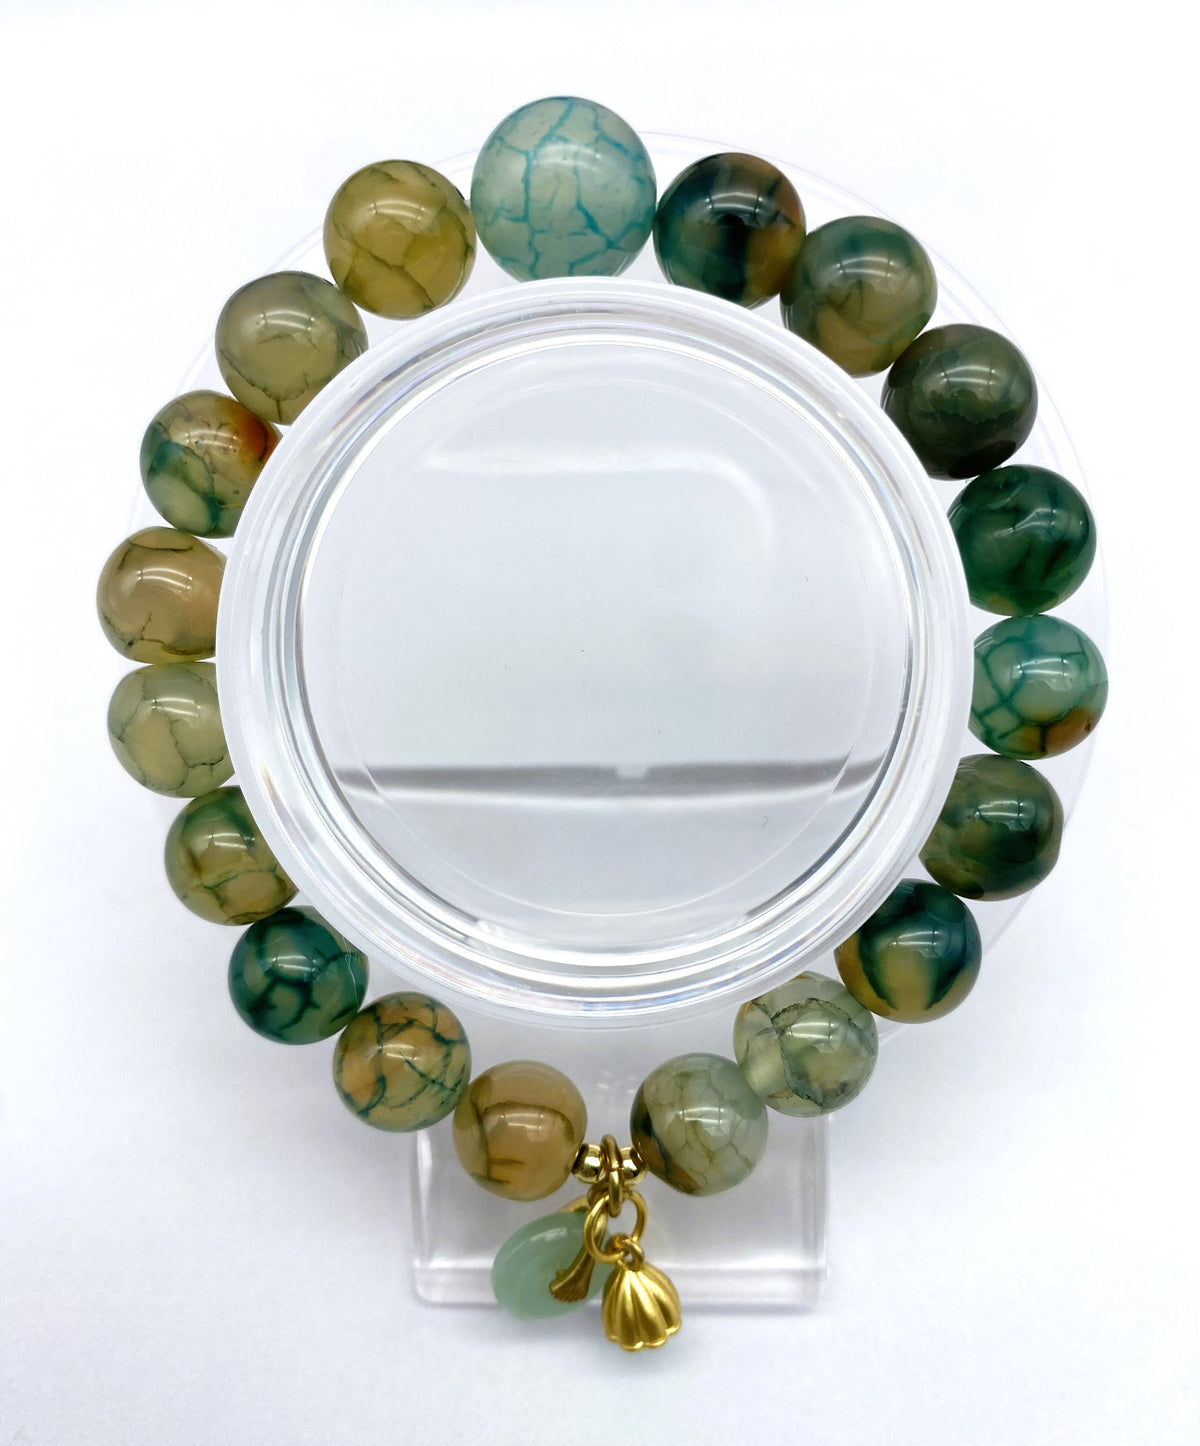 10mm 12mm Unique Design Dragon Vein Agate Bracelet Natural Stretch 7.5inches Healing Crystal